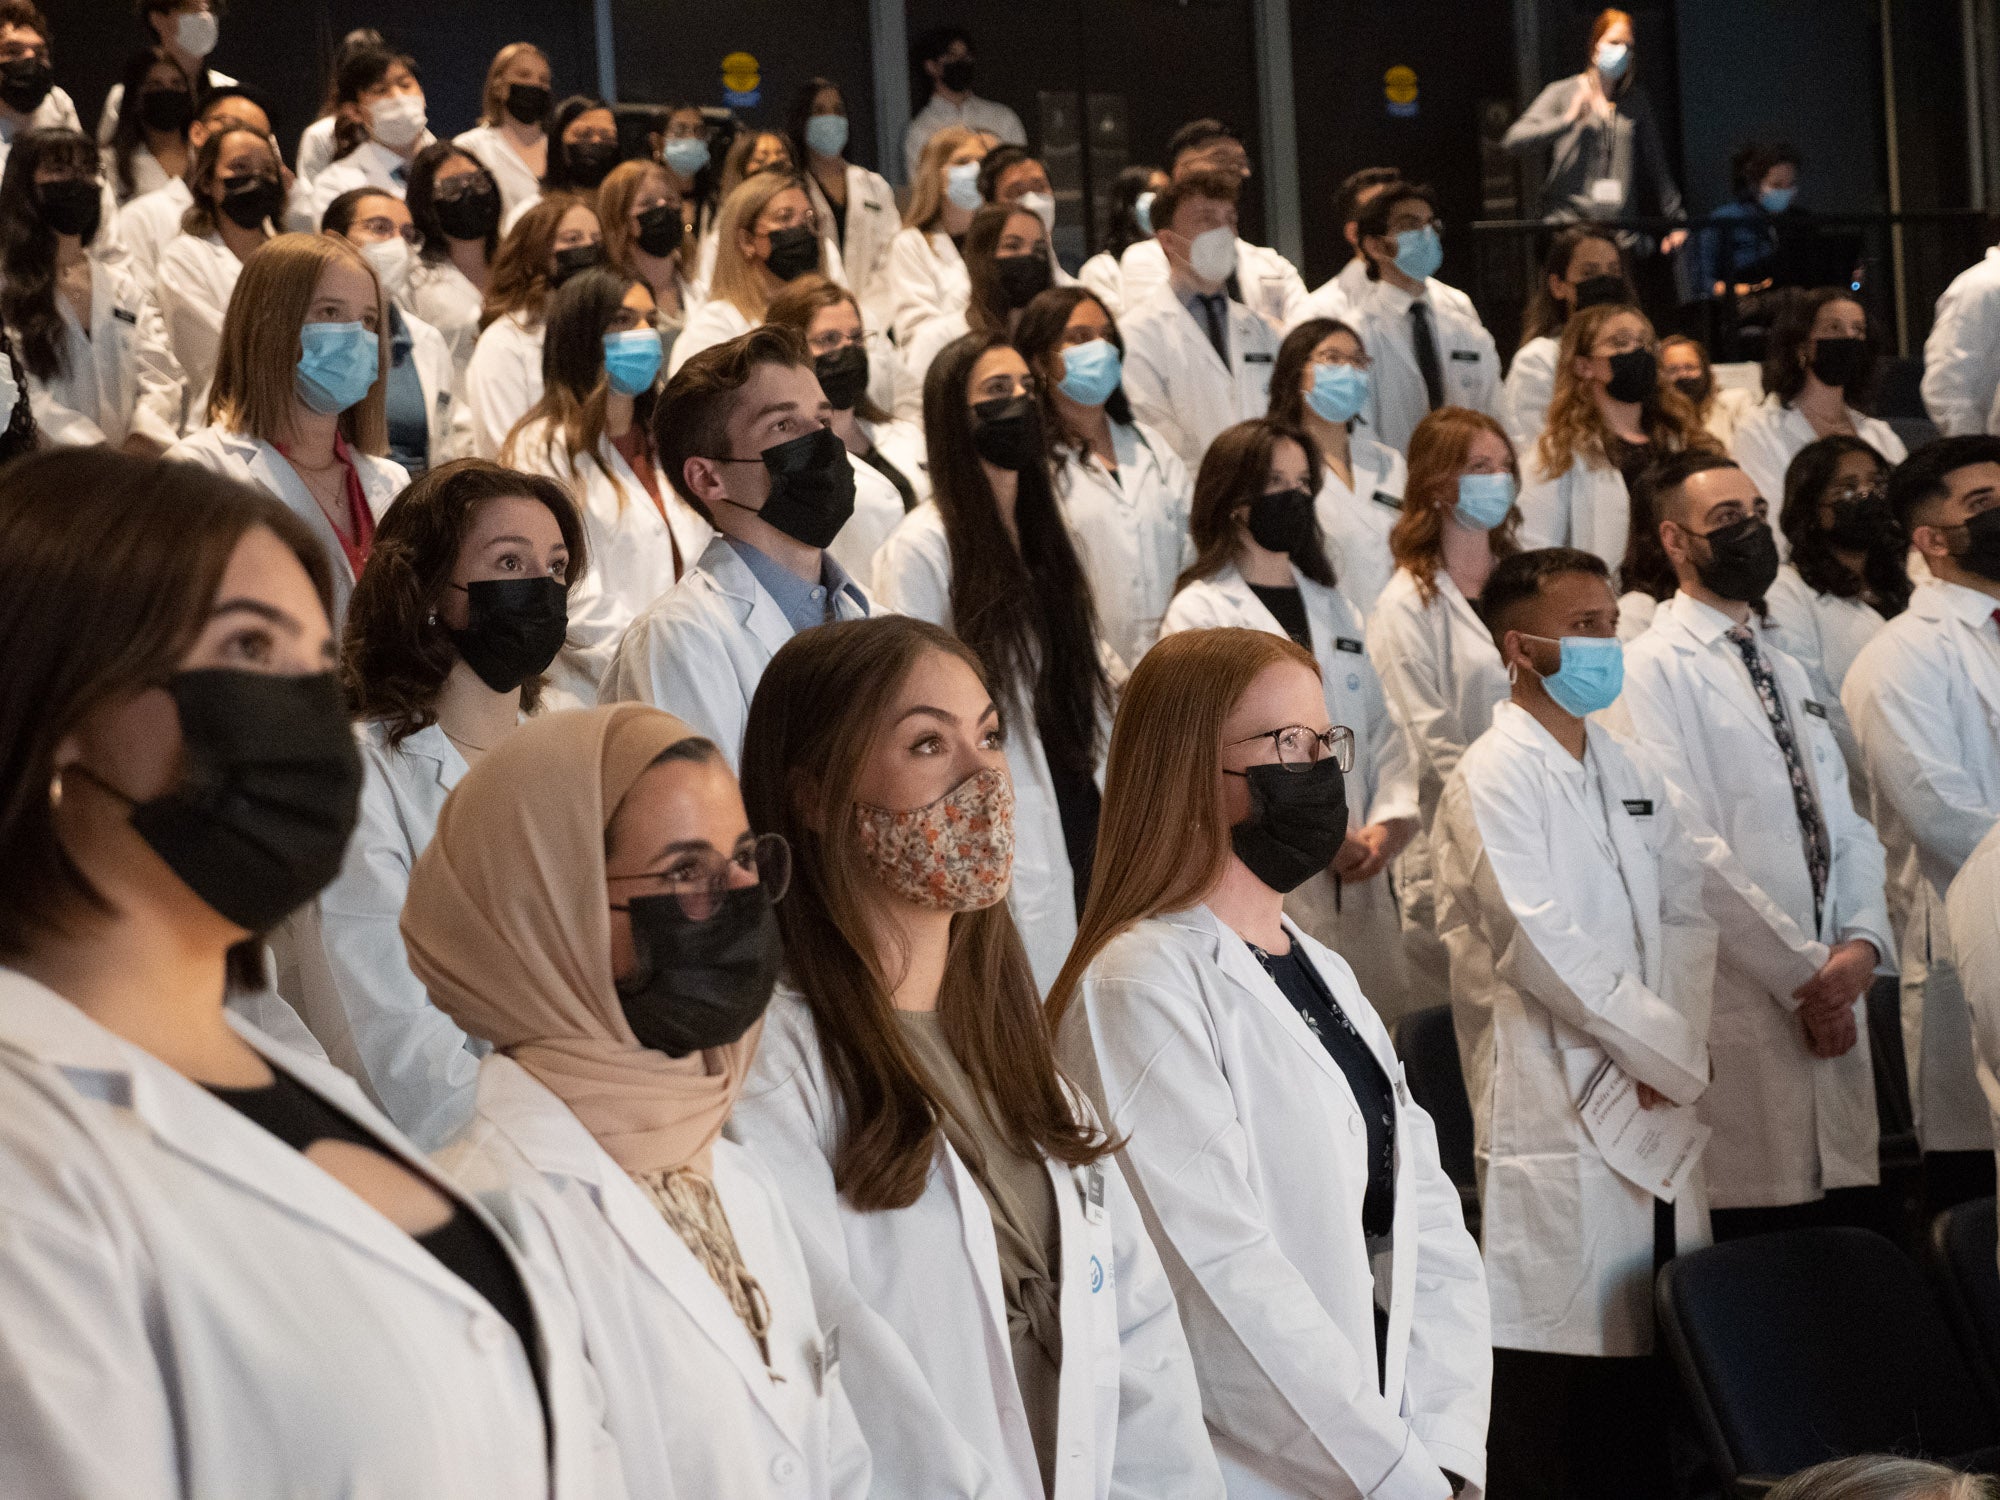 Students wearing masks and lab coats in a theatre